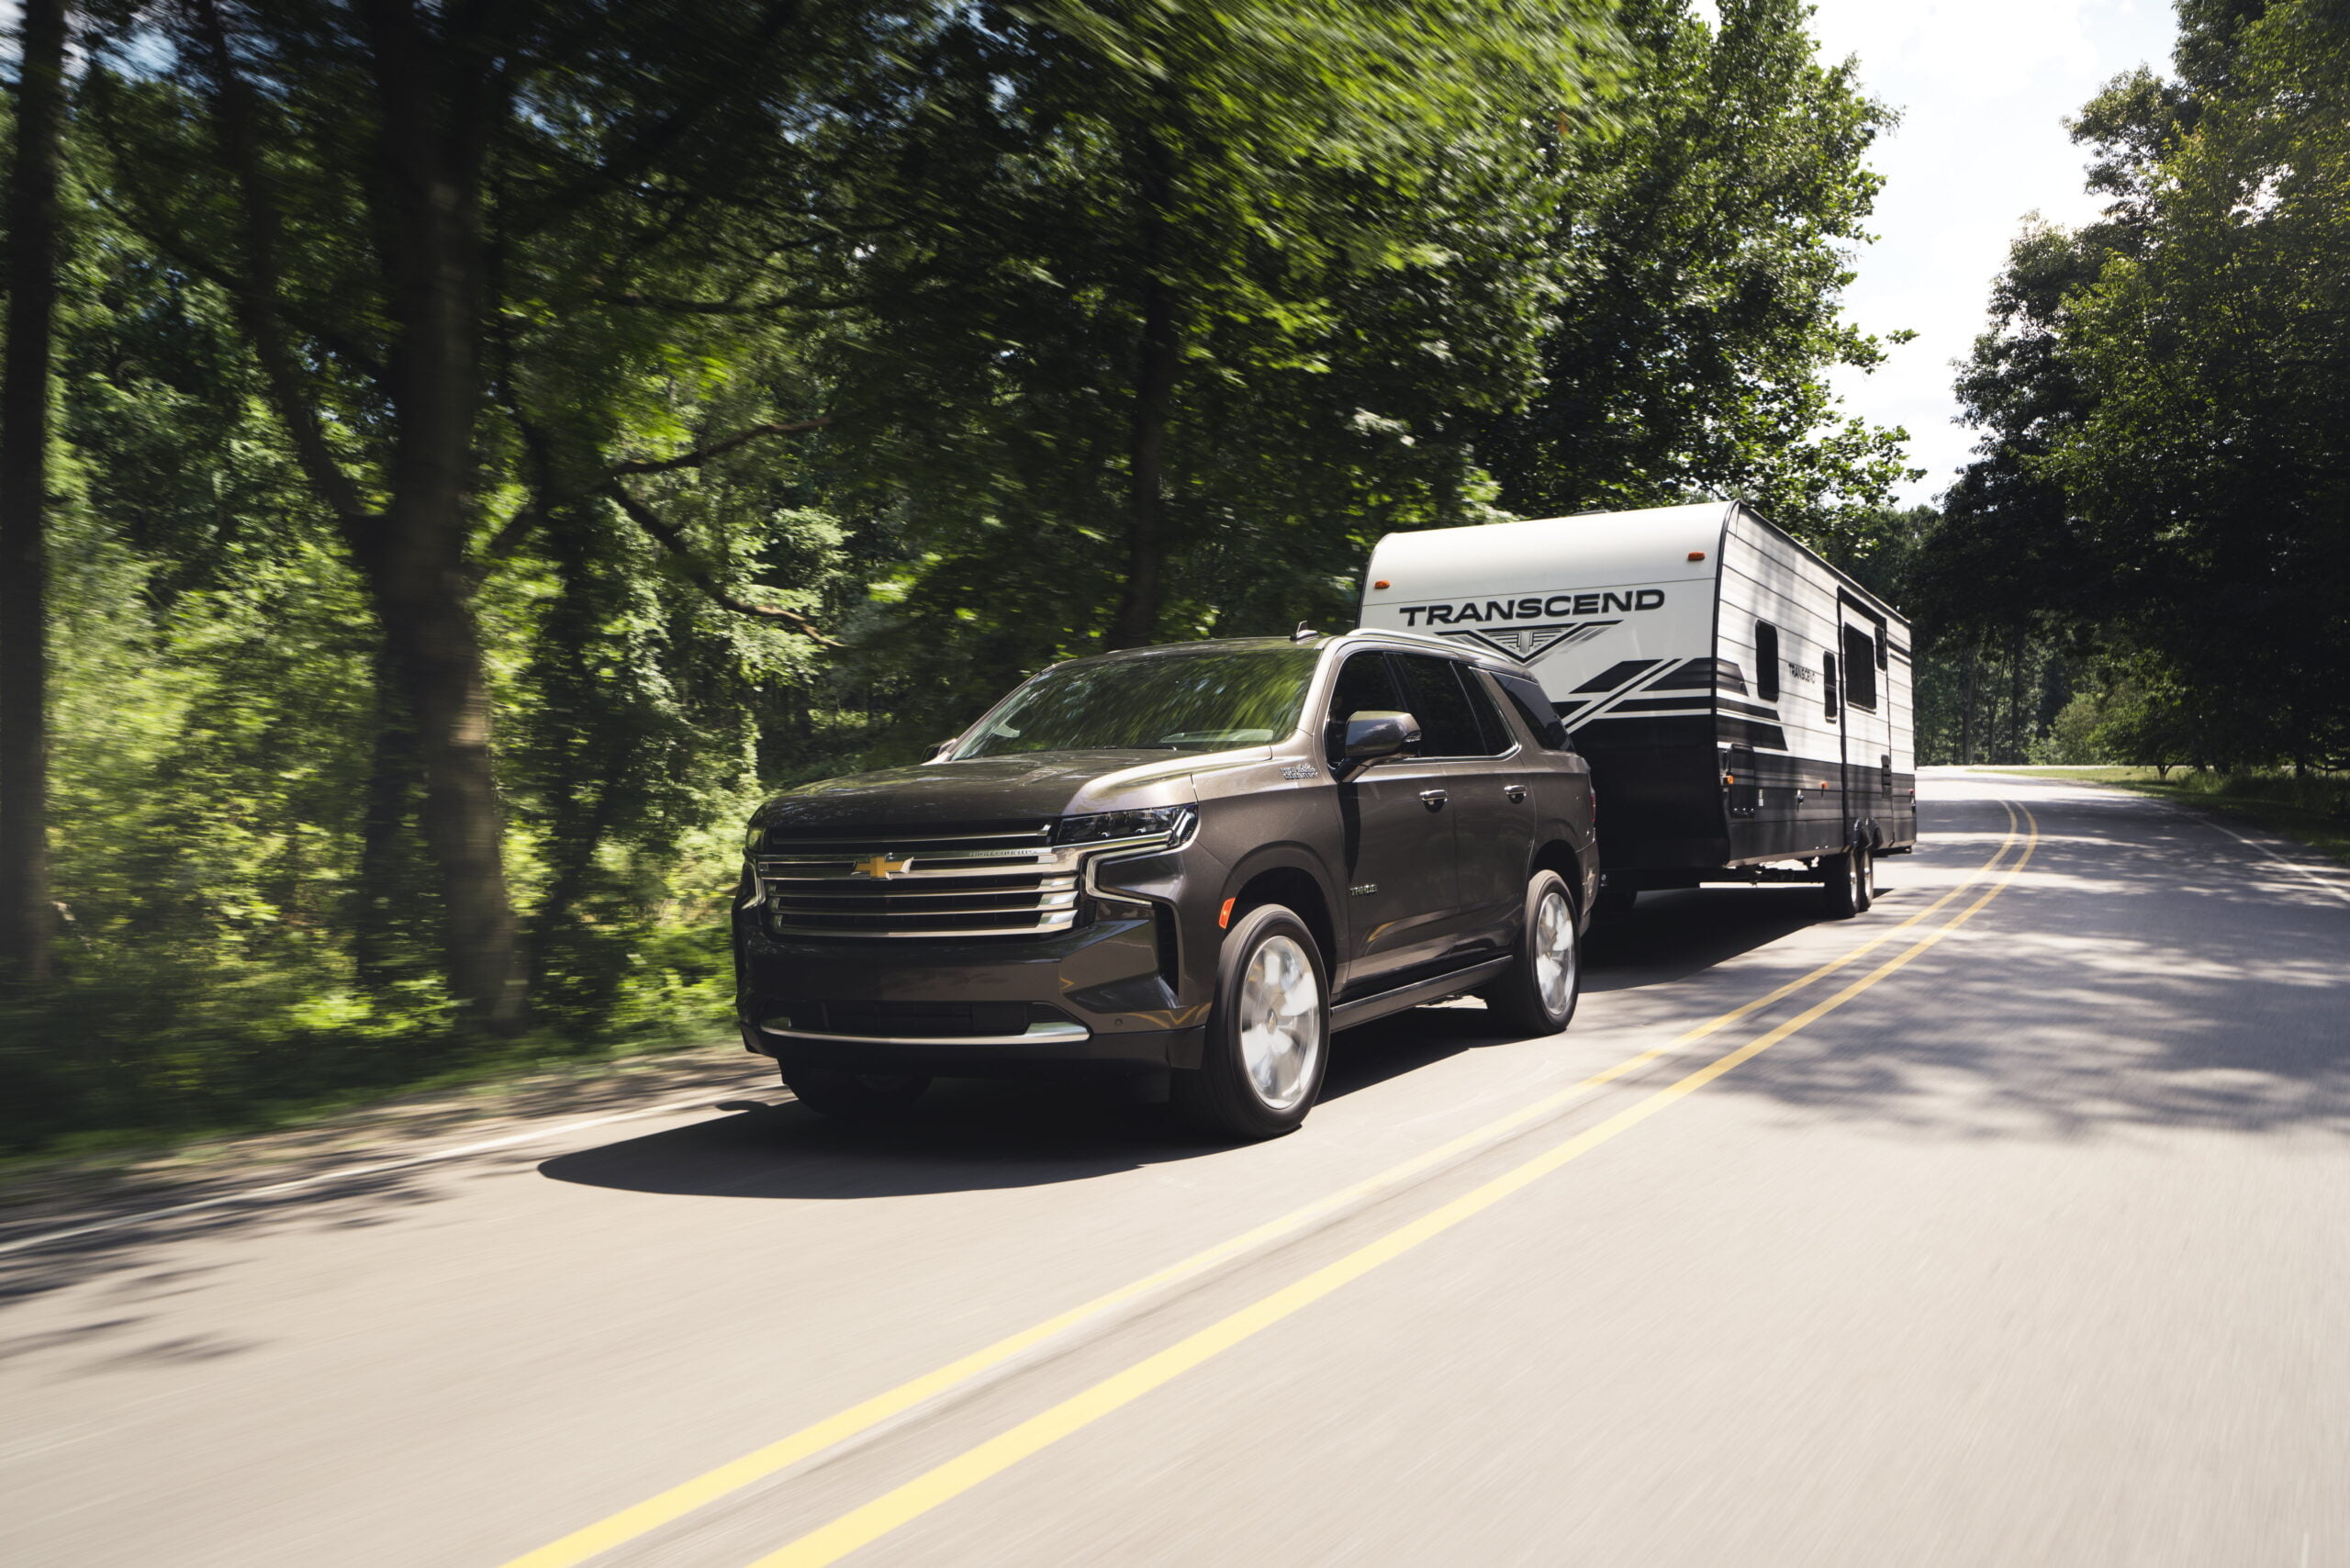 2021 Chevrolet Tahoe SUV towing an RV